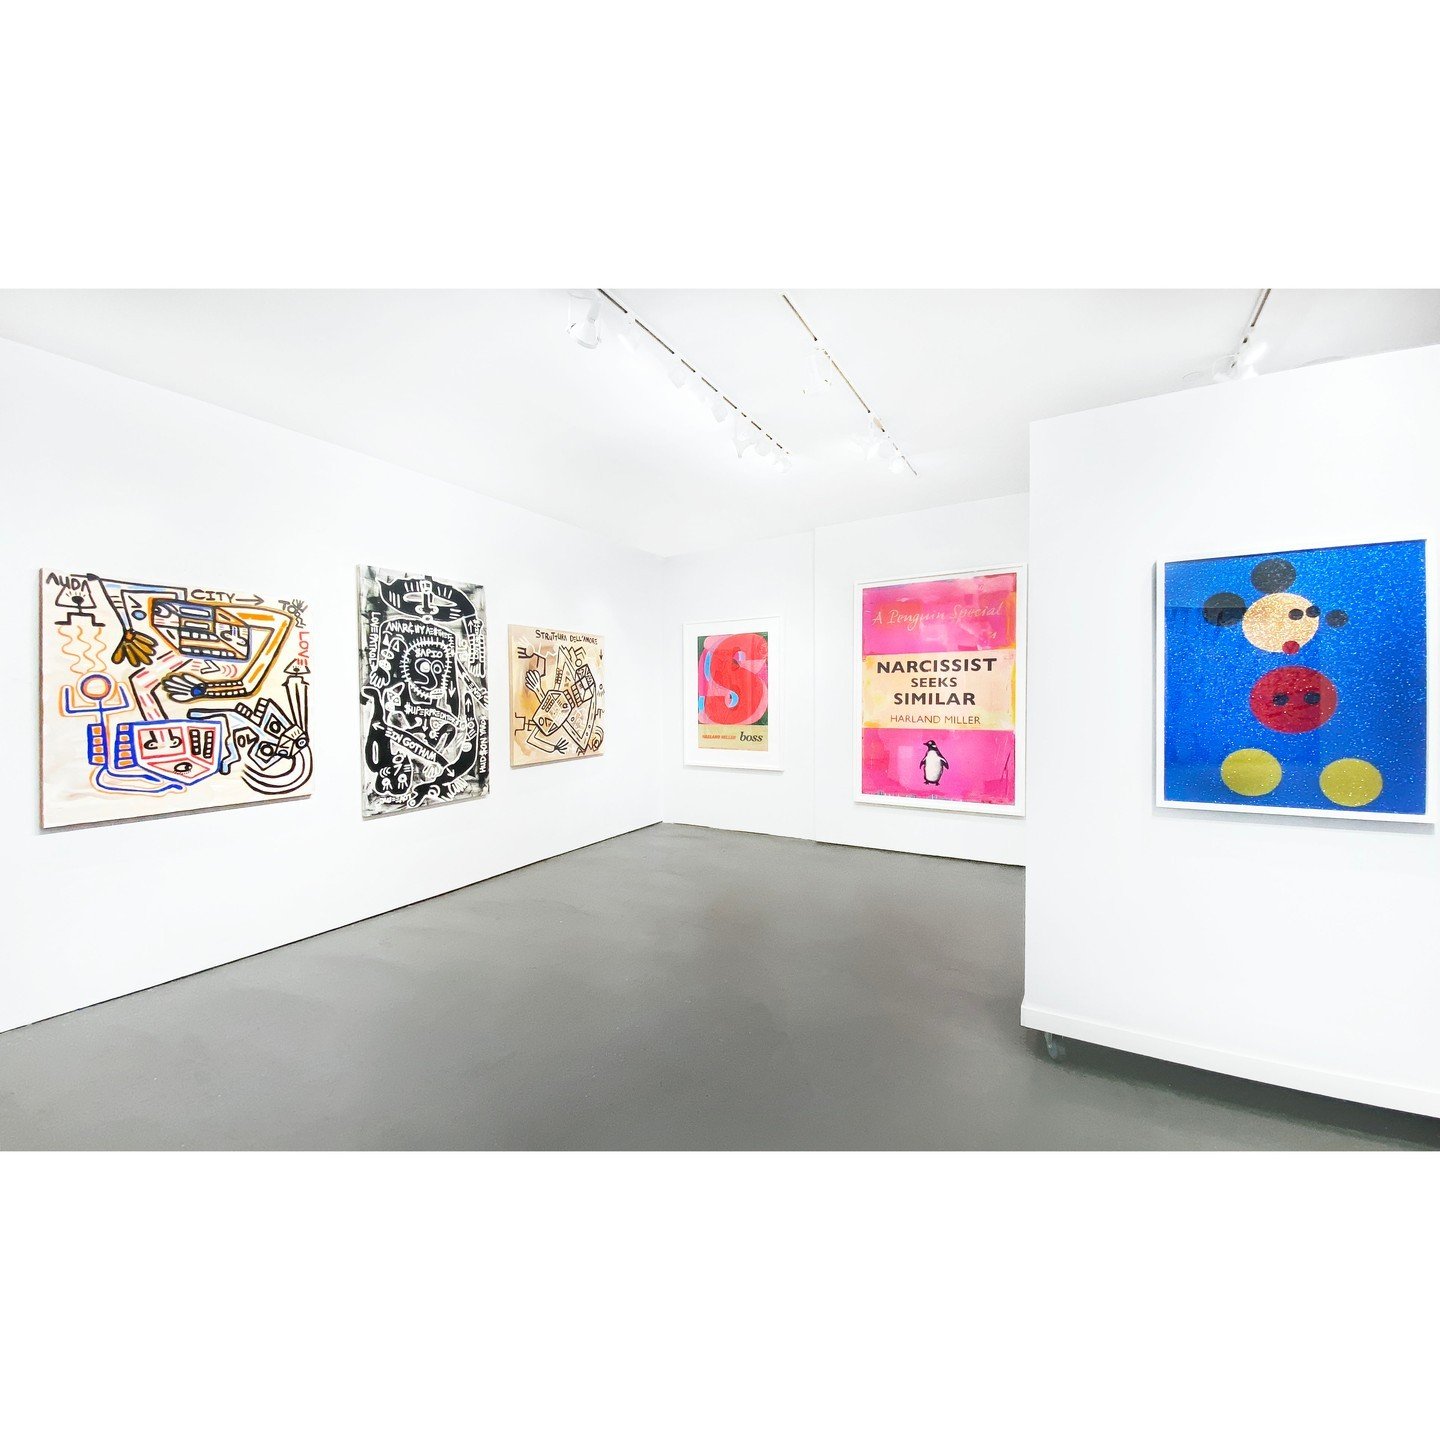 Much to see on our #NYC gallery walls 👀 from #HalimFlowers to #HarlandMiller and #DamienHirst, stop by to check it out!

Link in bio and DM for inquiries. Click the link in our shop to purchase Halim's book, &quot;Love Is The Vaccine&quot; ❤️&zwj;🔥